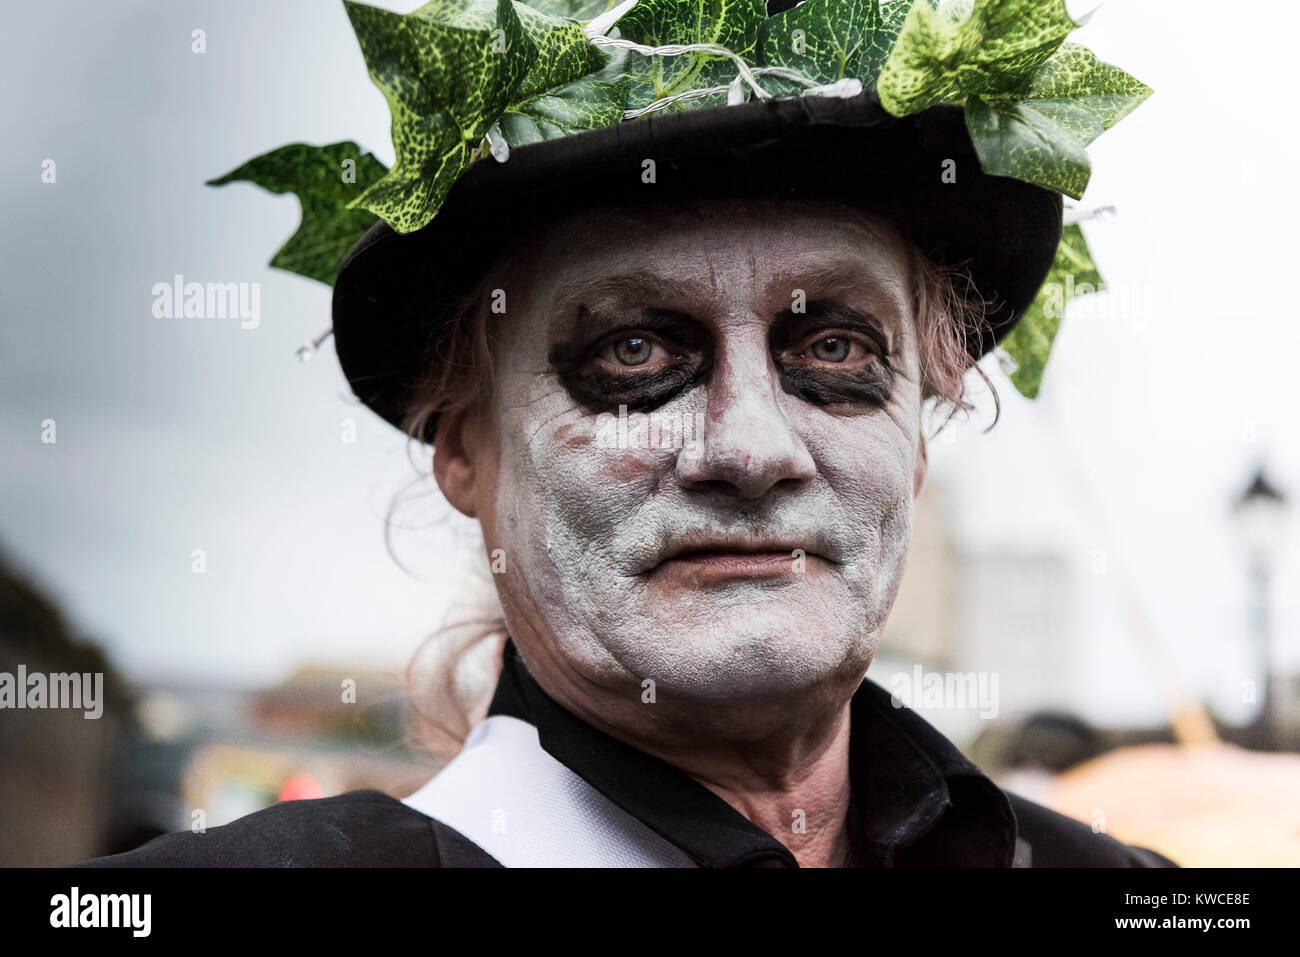 A participant in the Montol Festival in Penzance celebrating the Winter Solstice. Stock Photo